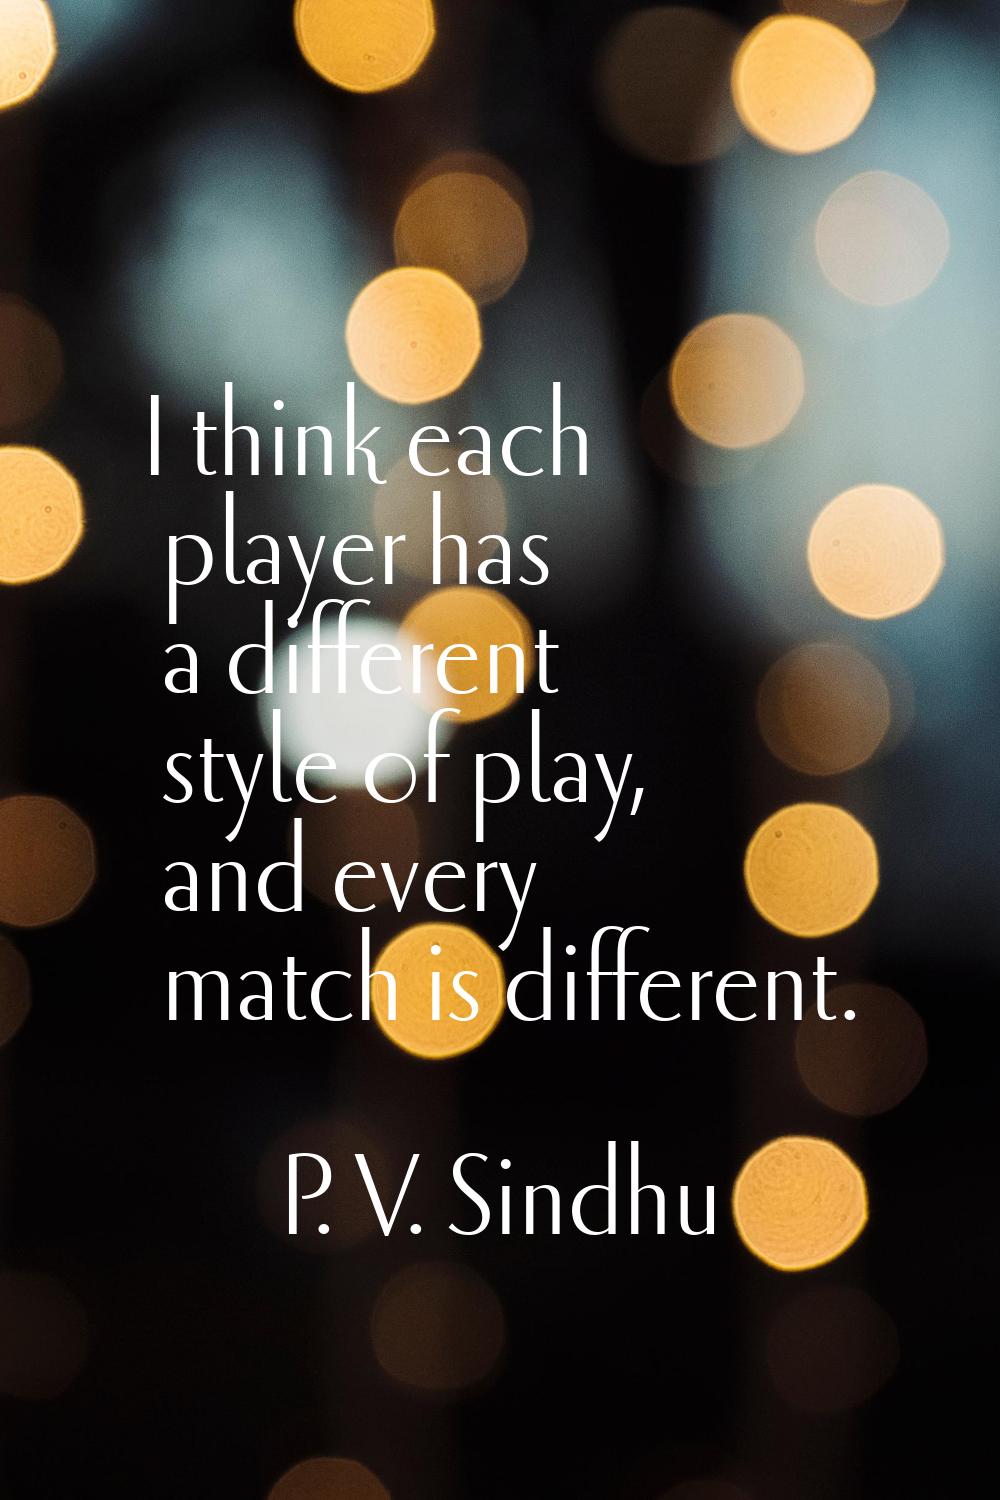 I think each player has a different style of play, and every match is different.